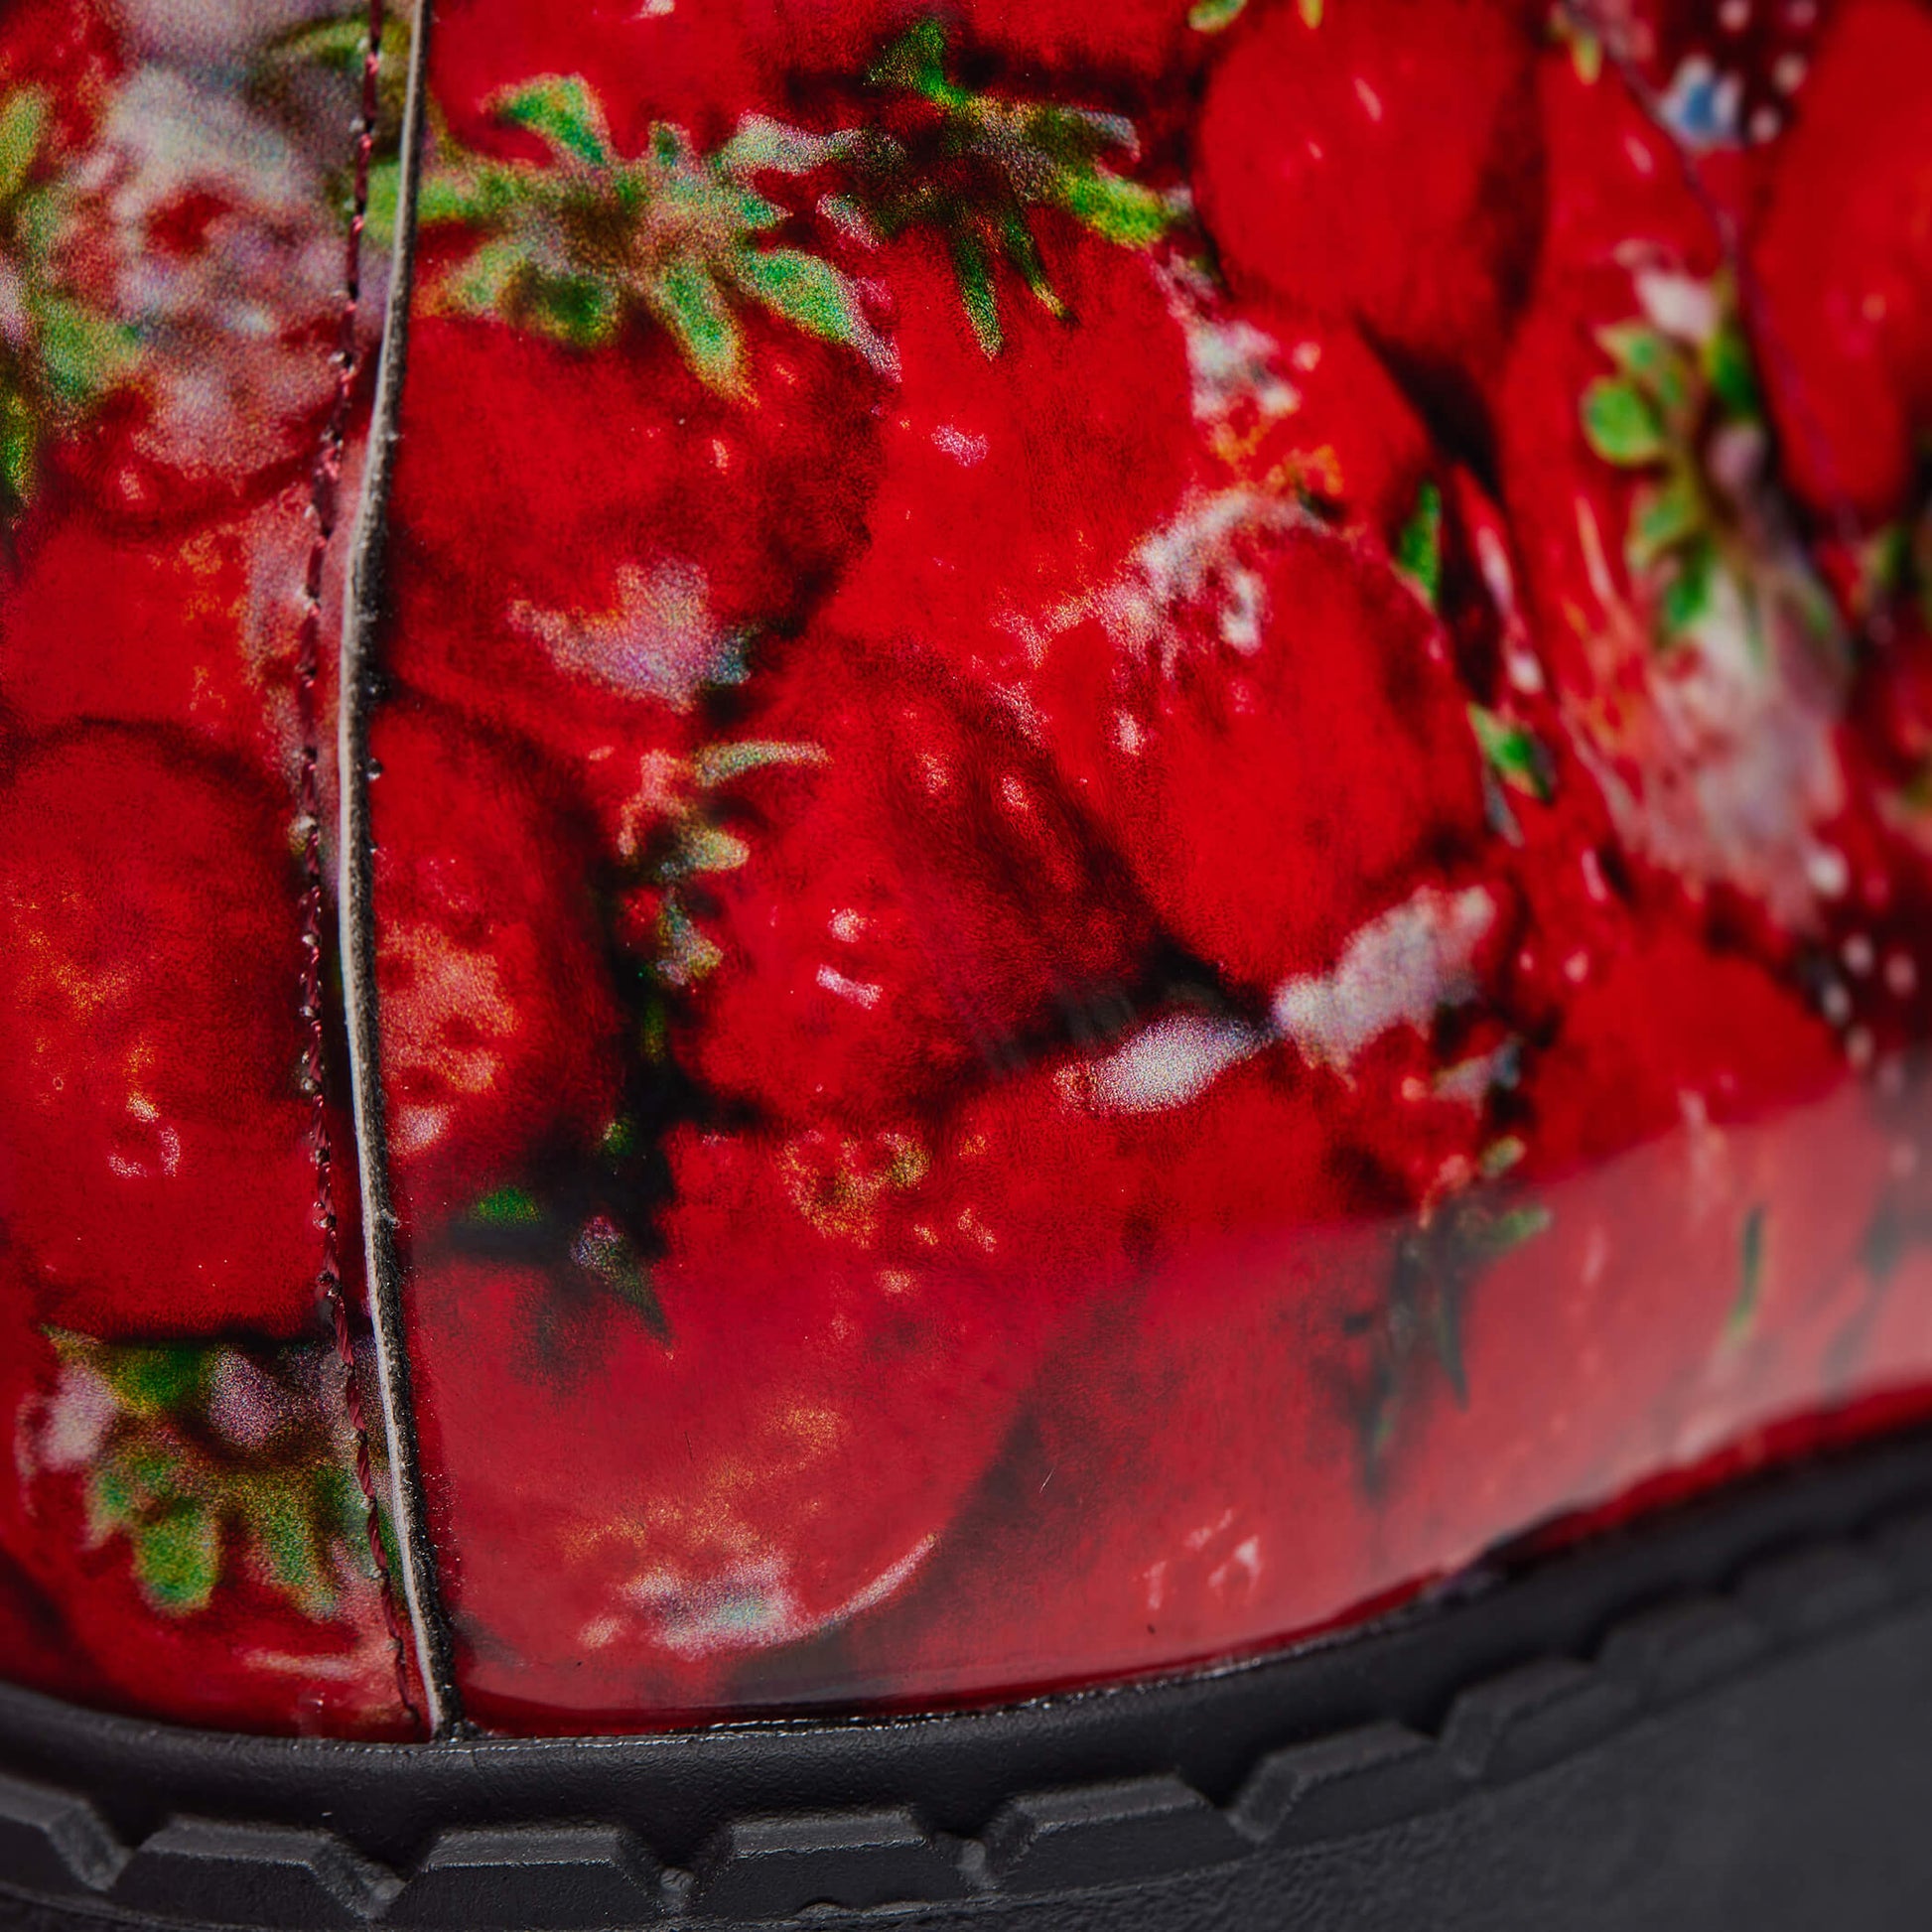 Frozen Strawberries Switch Boots - Ankle Boots - KOI Footwear - Red - Material Detail